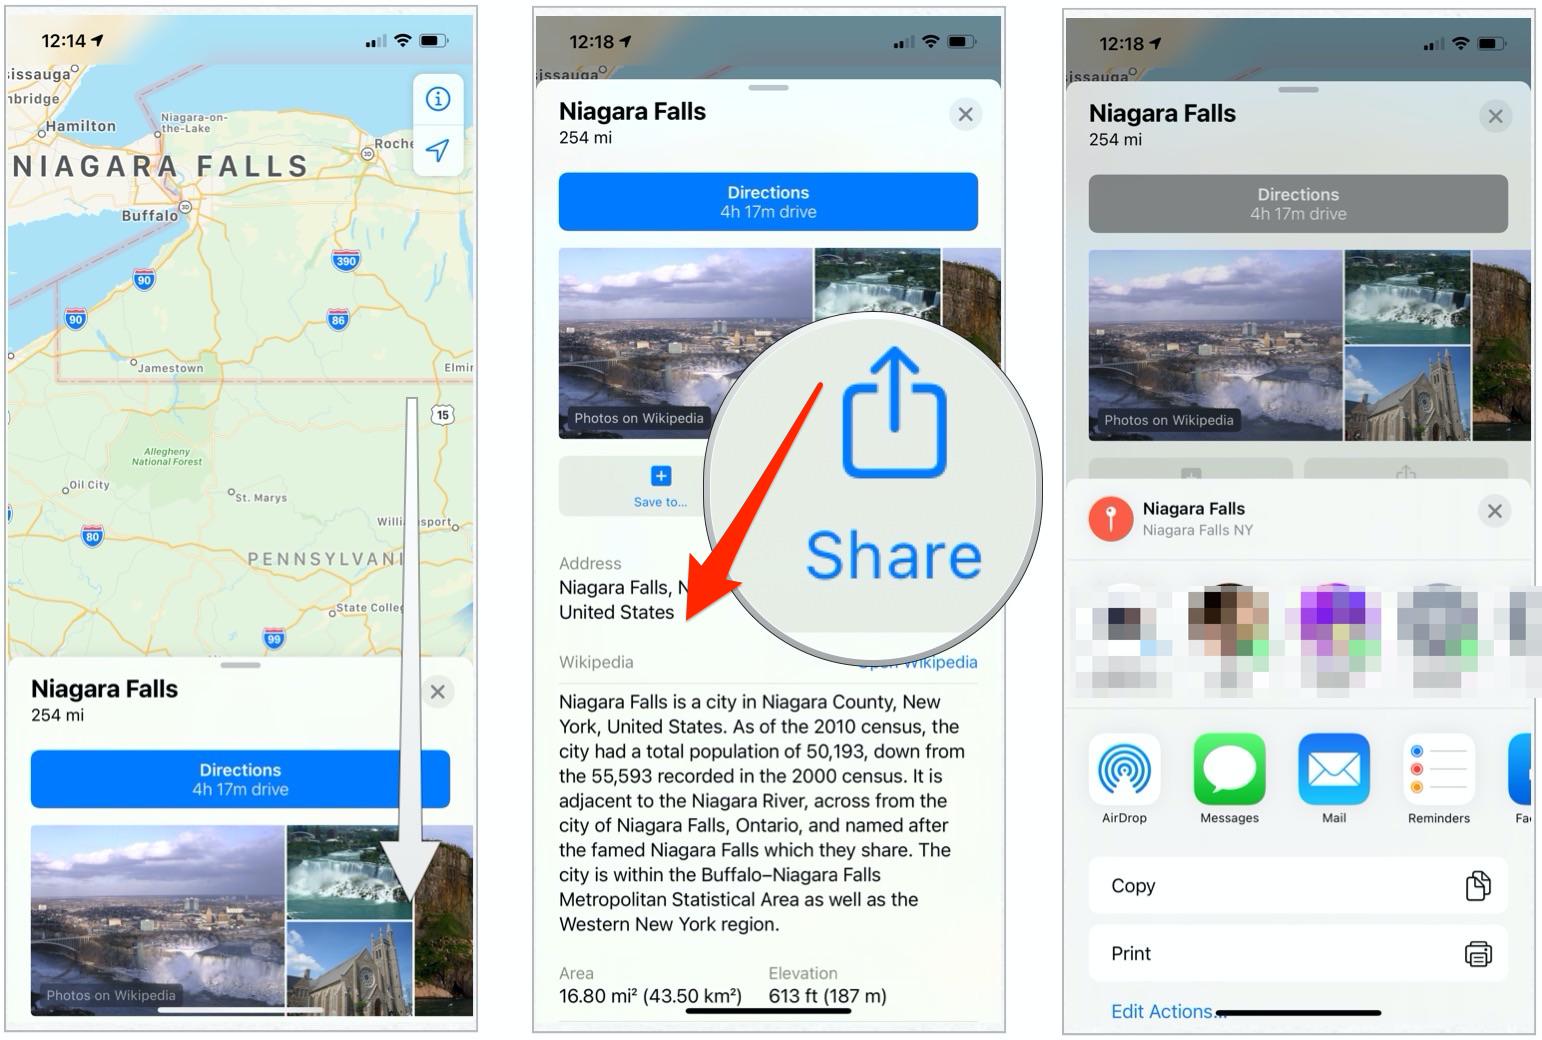 To share directions with Maps, select the share sheet icon. Then send using your preferred method.